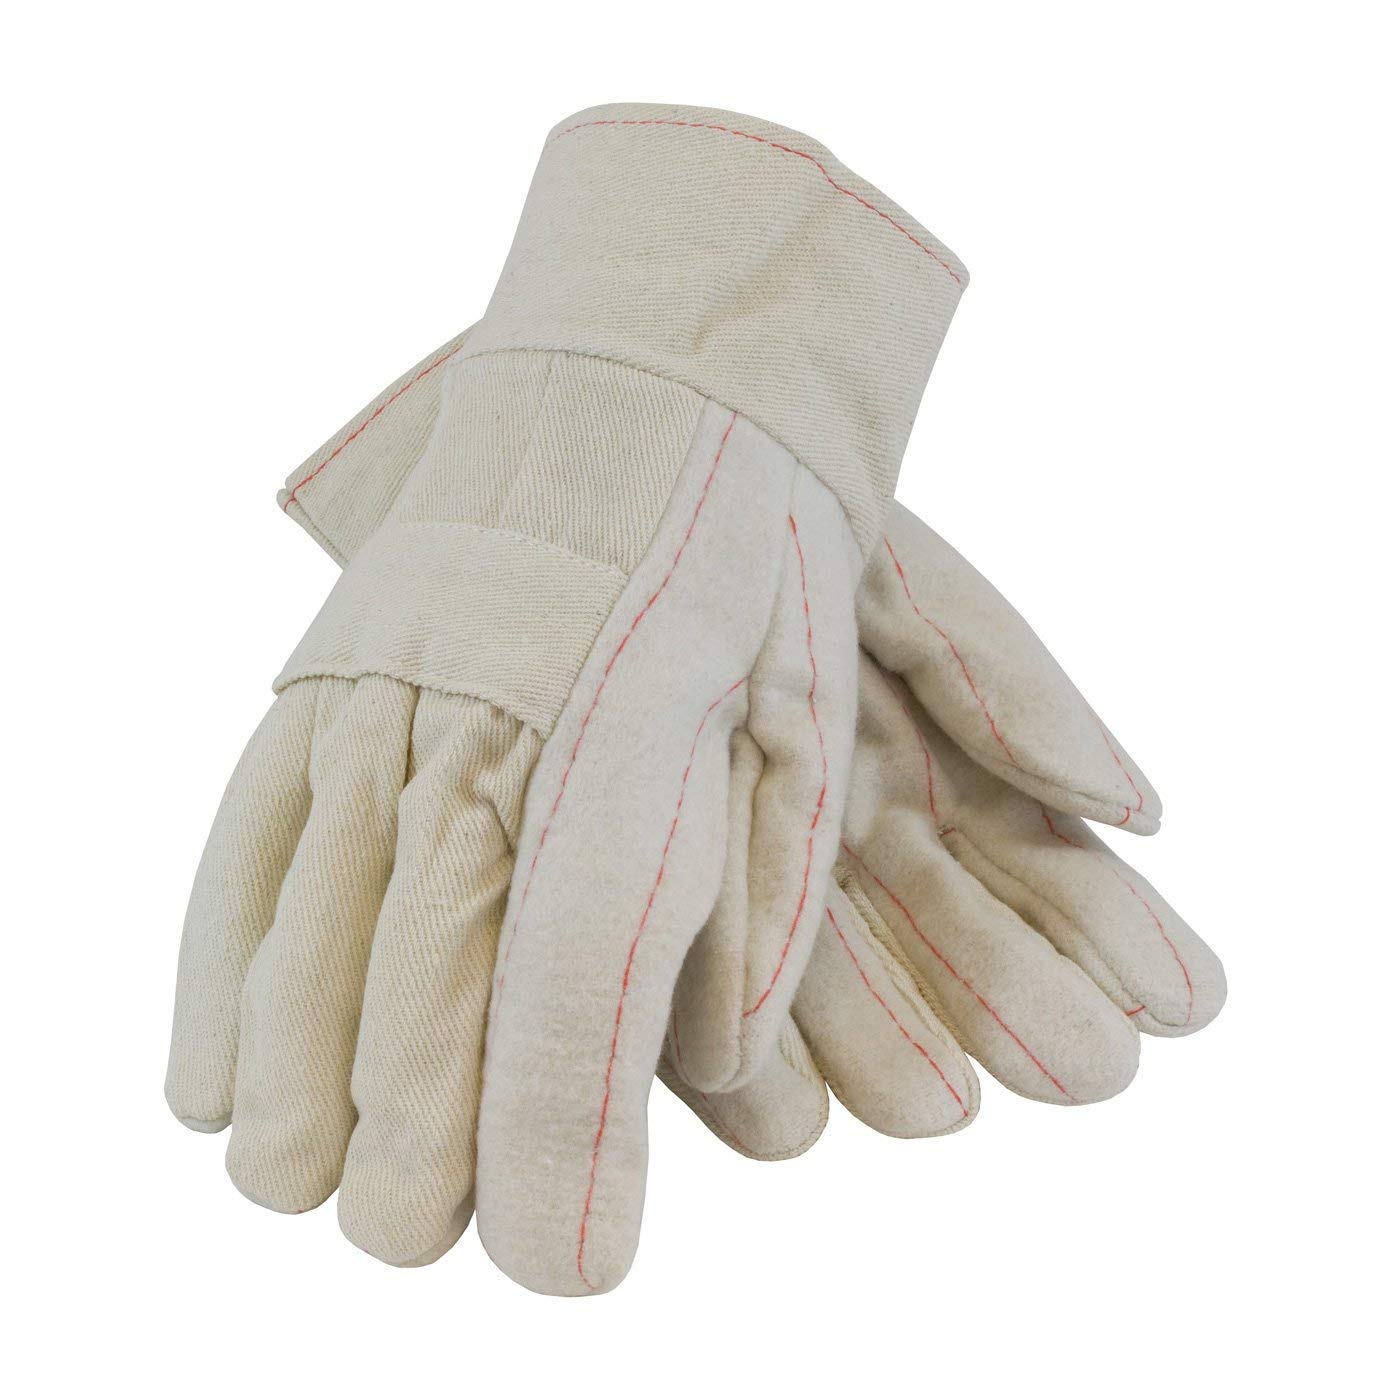 Economy Grade Hot Mill Gloves w/Two Layers of Cotton Canvas